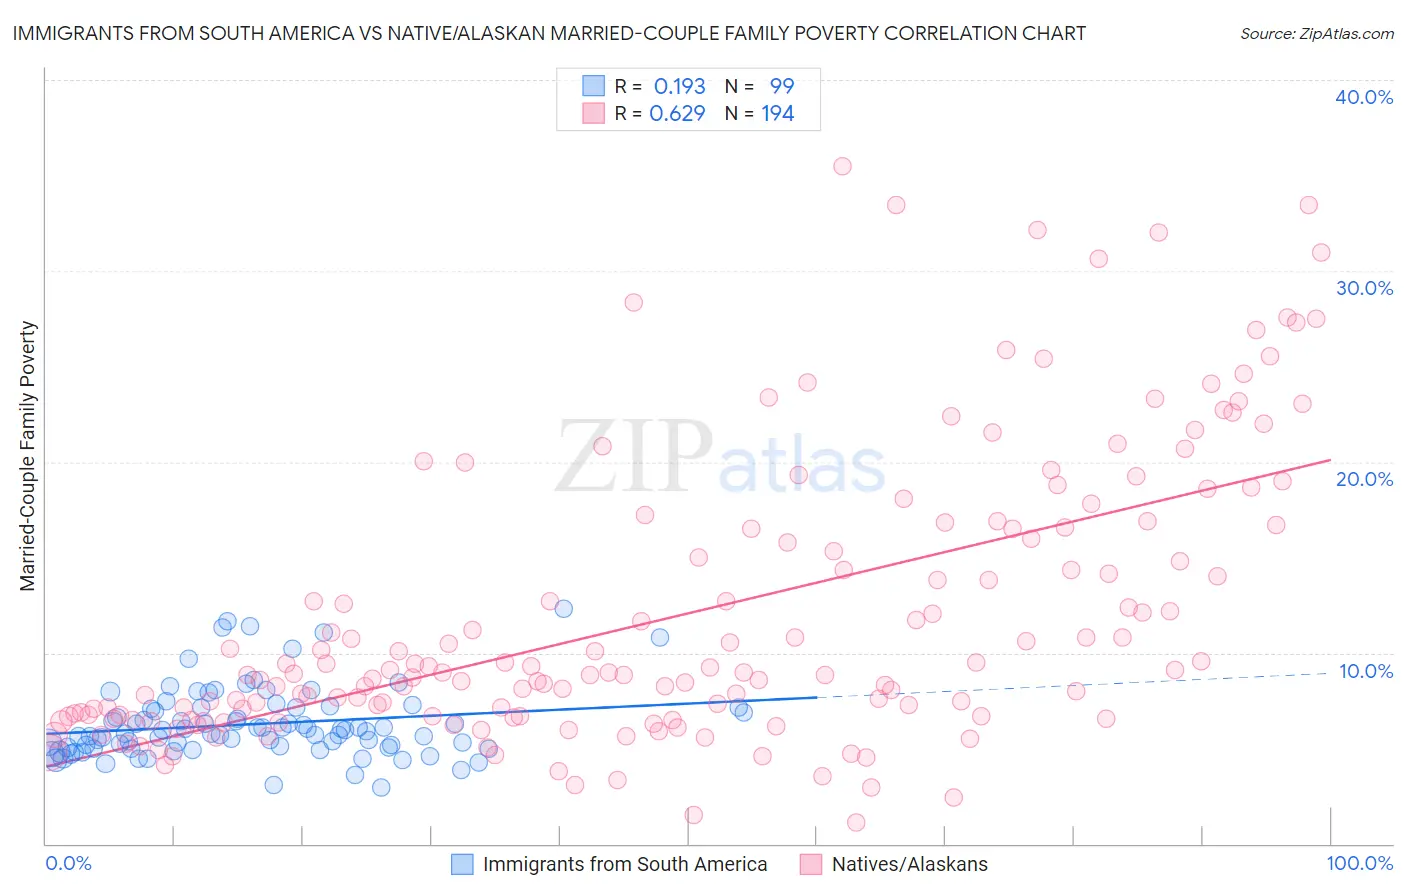 Immigrants from South America vs Native/Alaskan Married-Couple Family Poverty